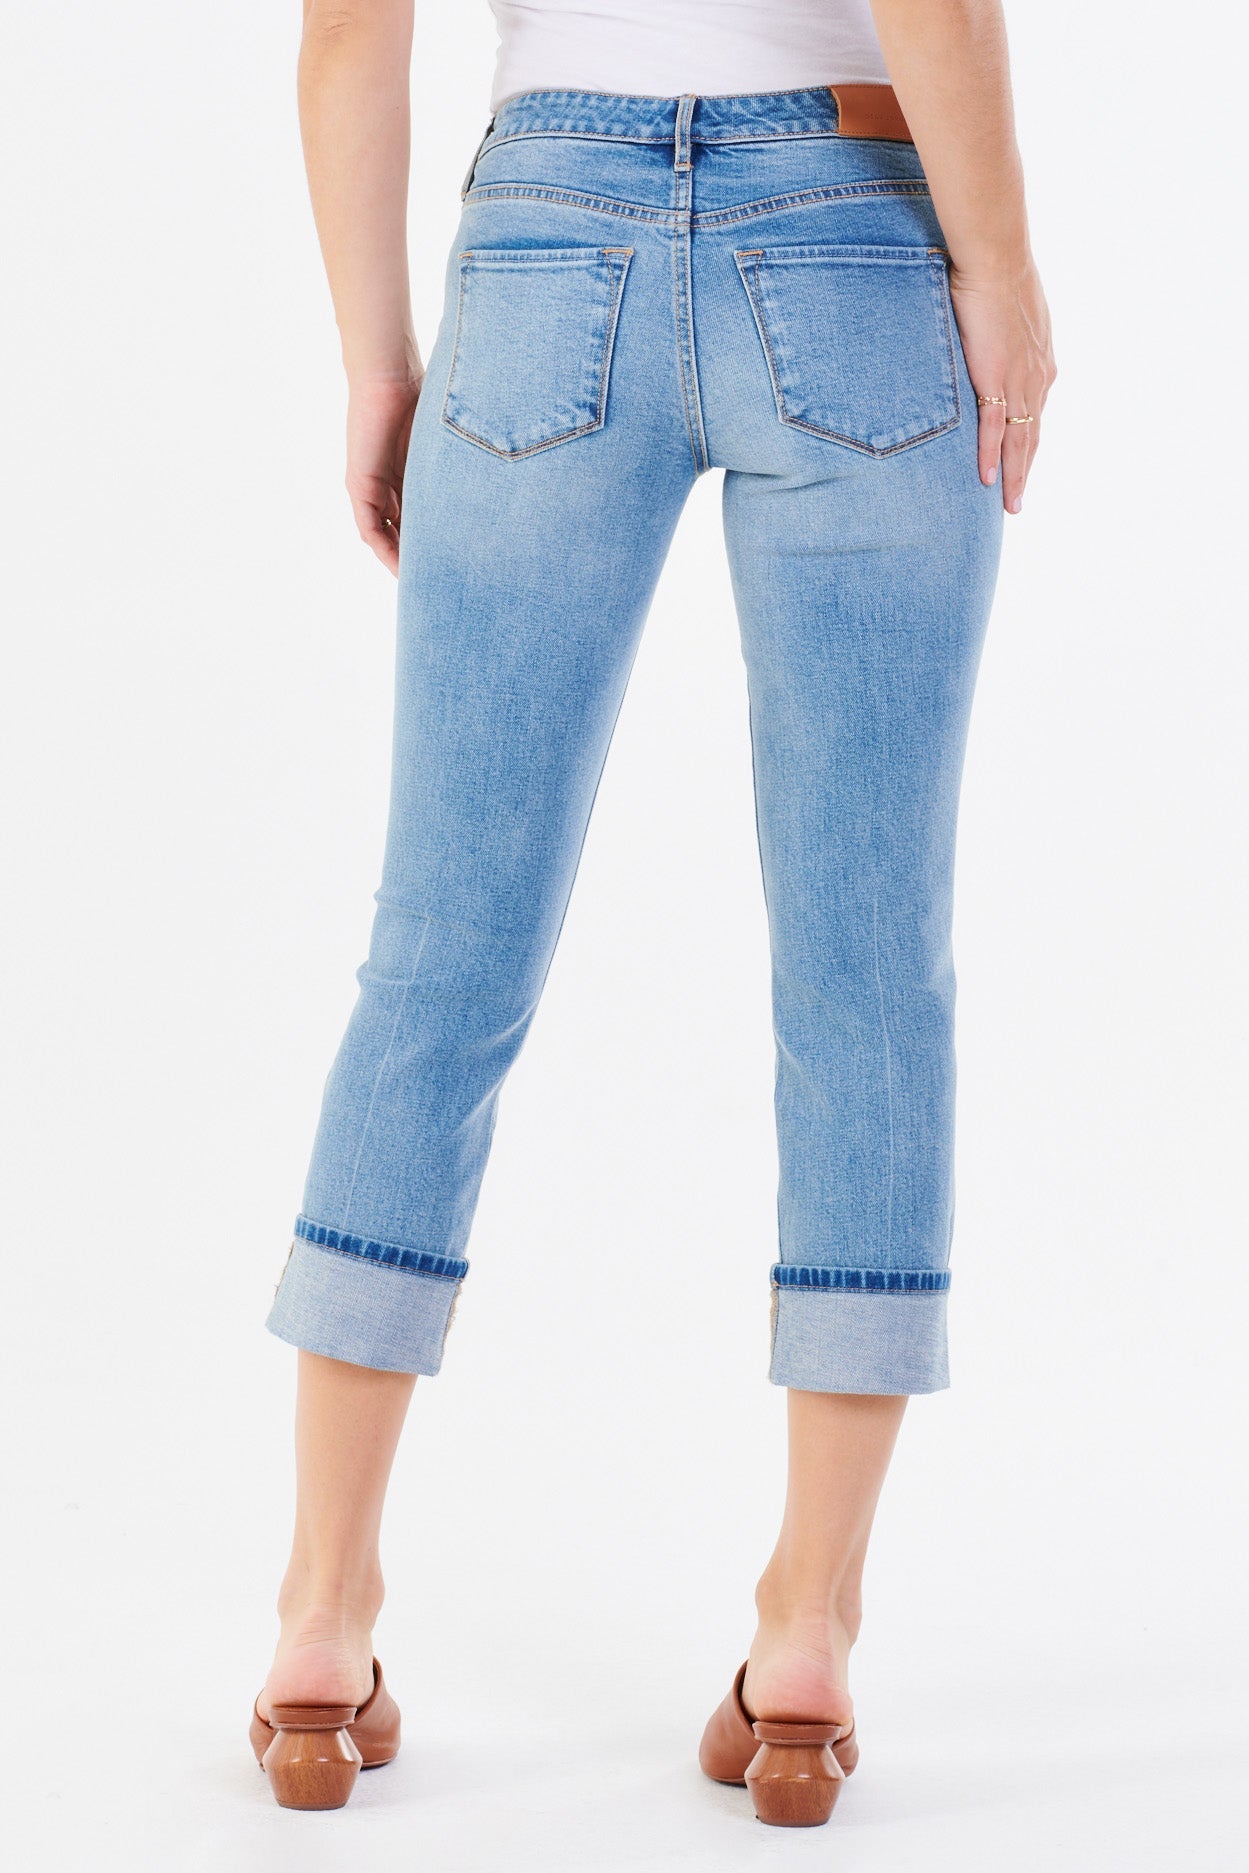 blaire-high-rise-cuffed-slim-straight-jeans-daylight